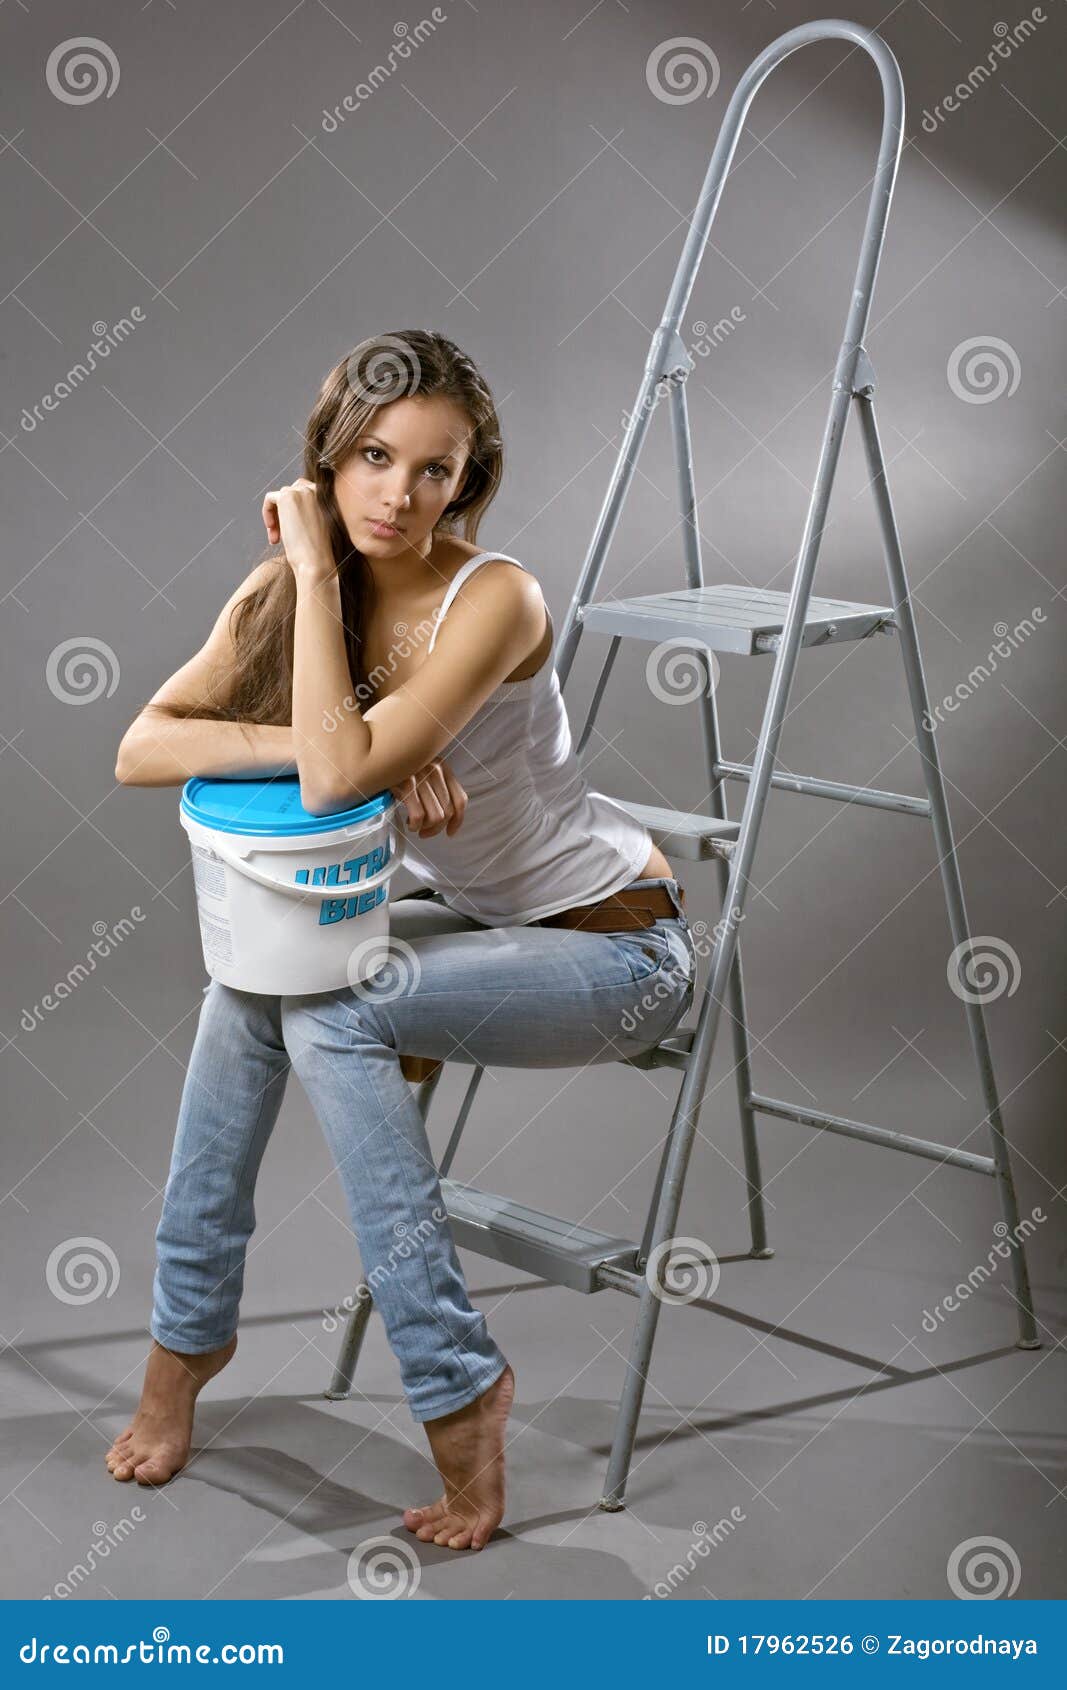 Sexy Young Woman Construction Worker Royalty Free Stock Image - Image ...